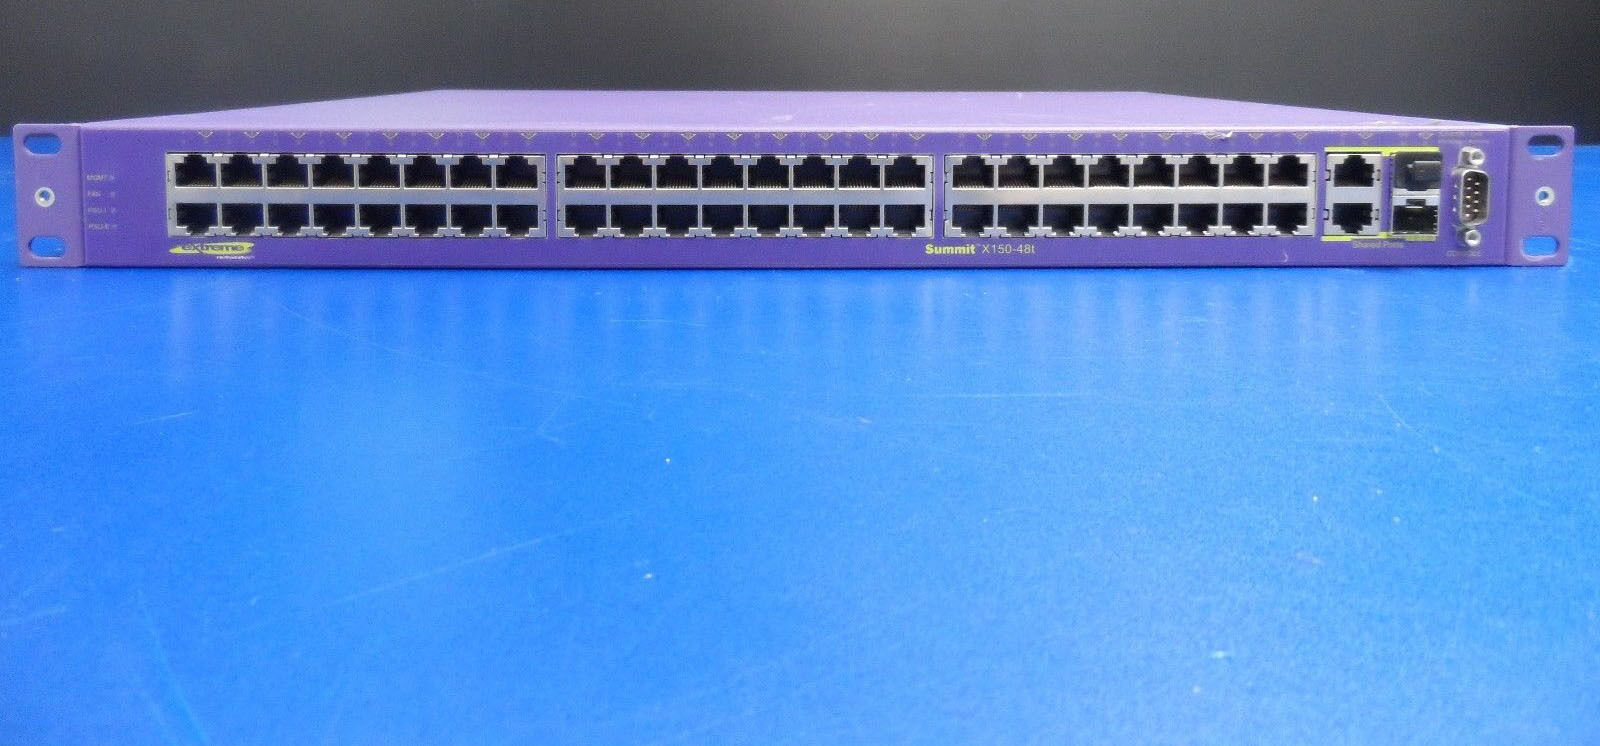 Extreme Networks Summit X150-48T 15203 48-Ports Stackable Managed Switch 